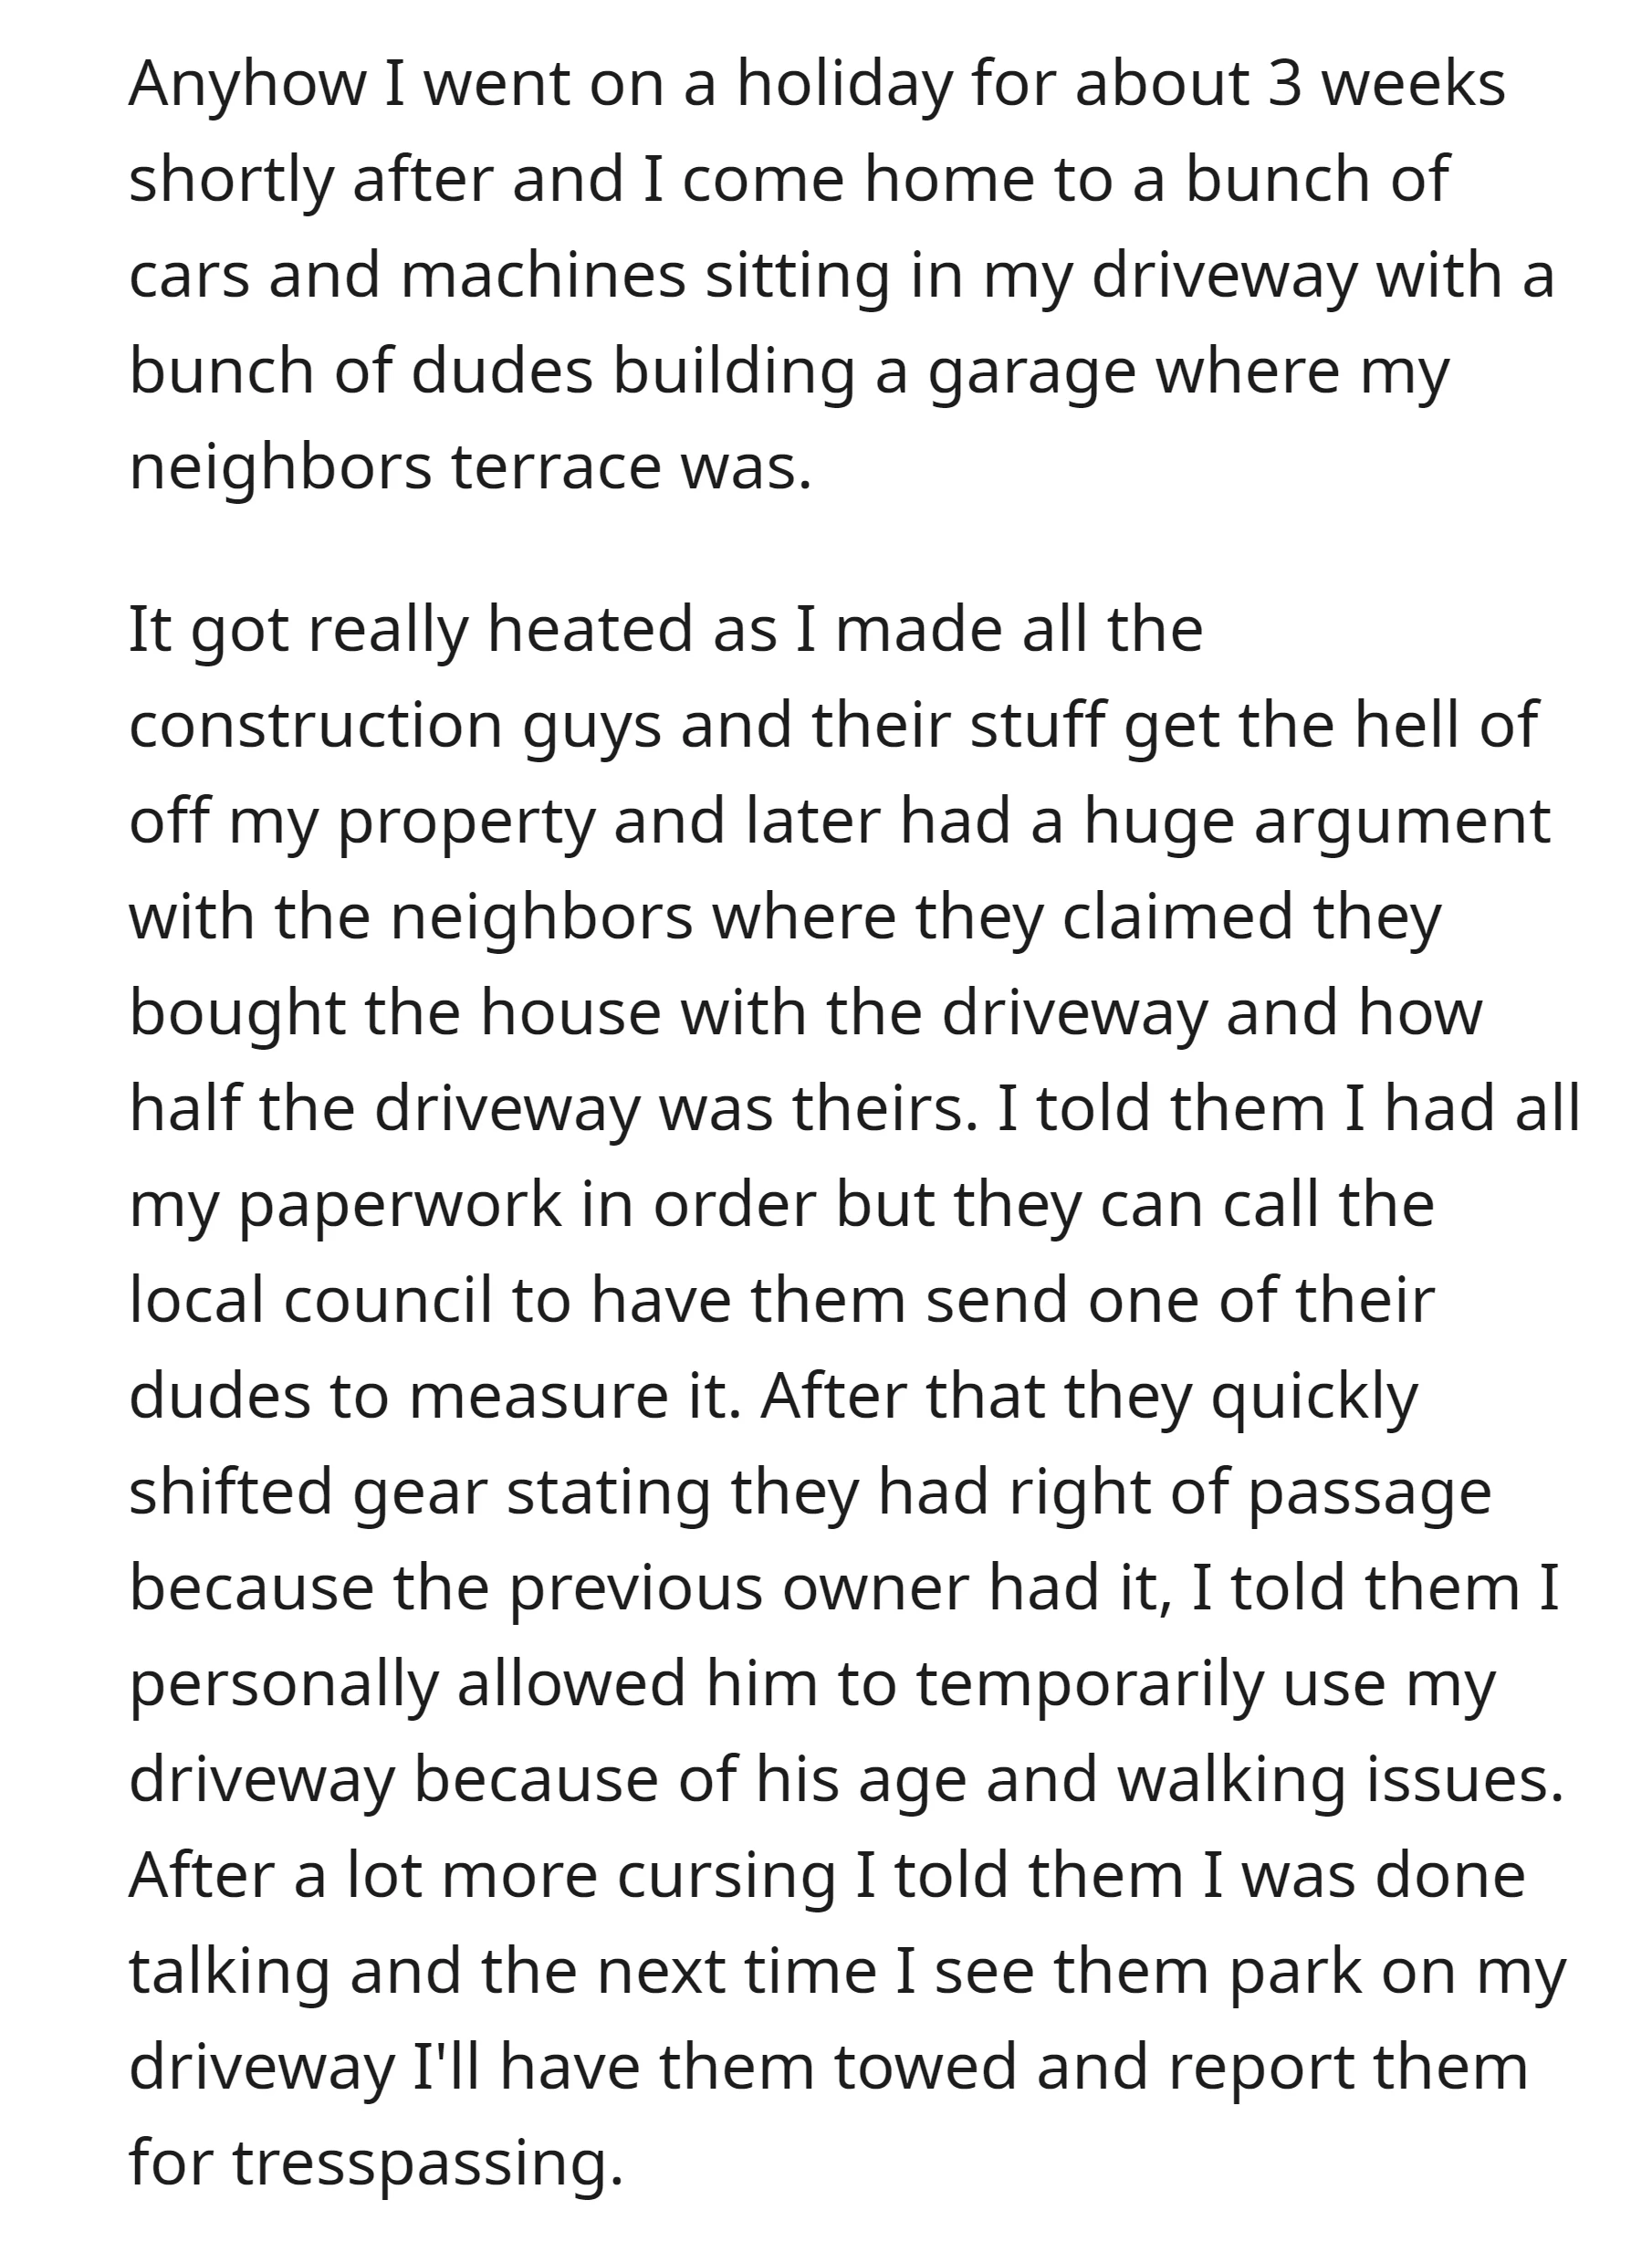 Returning from holiday, his new neighbors claimed ownership of his driveway